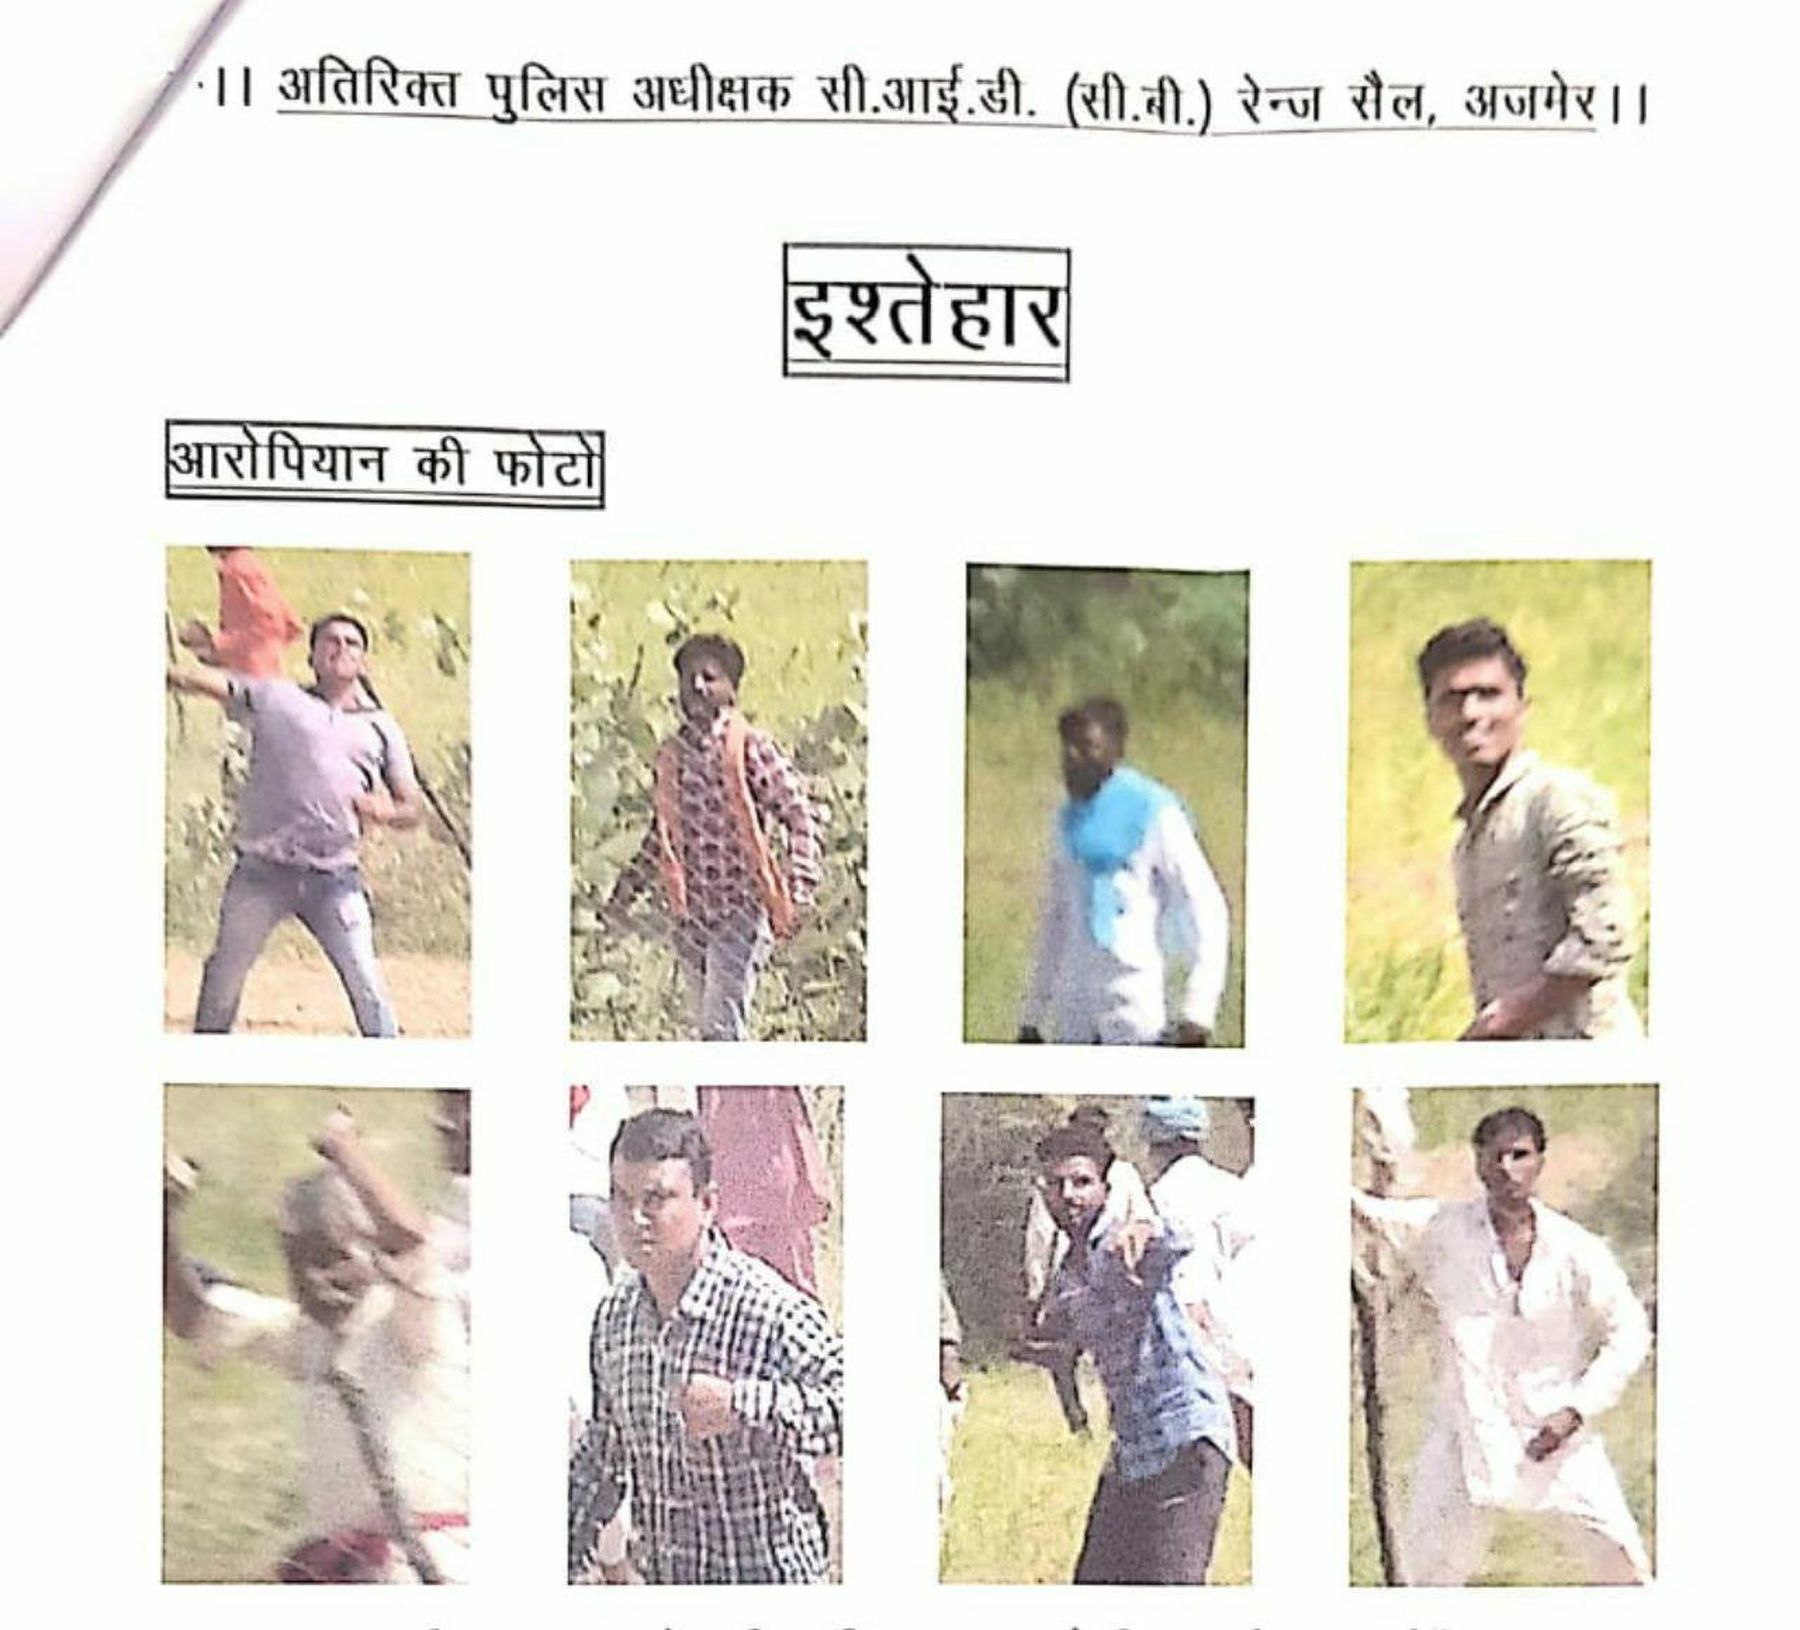 CID (CB) releases advertisement for eight absconding accused